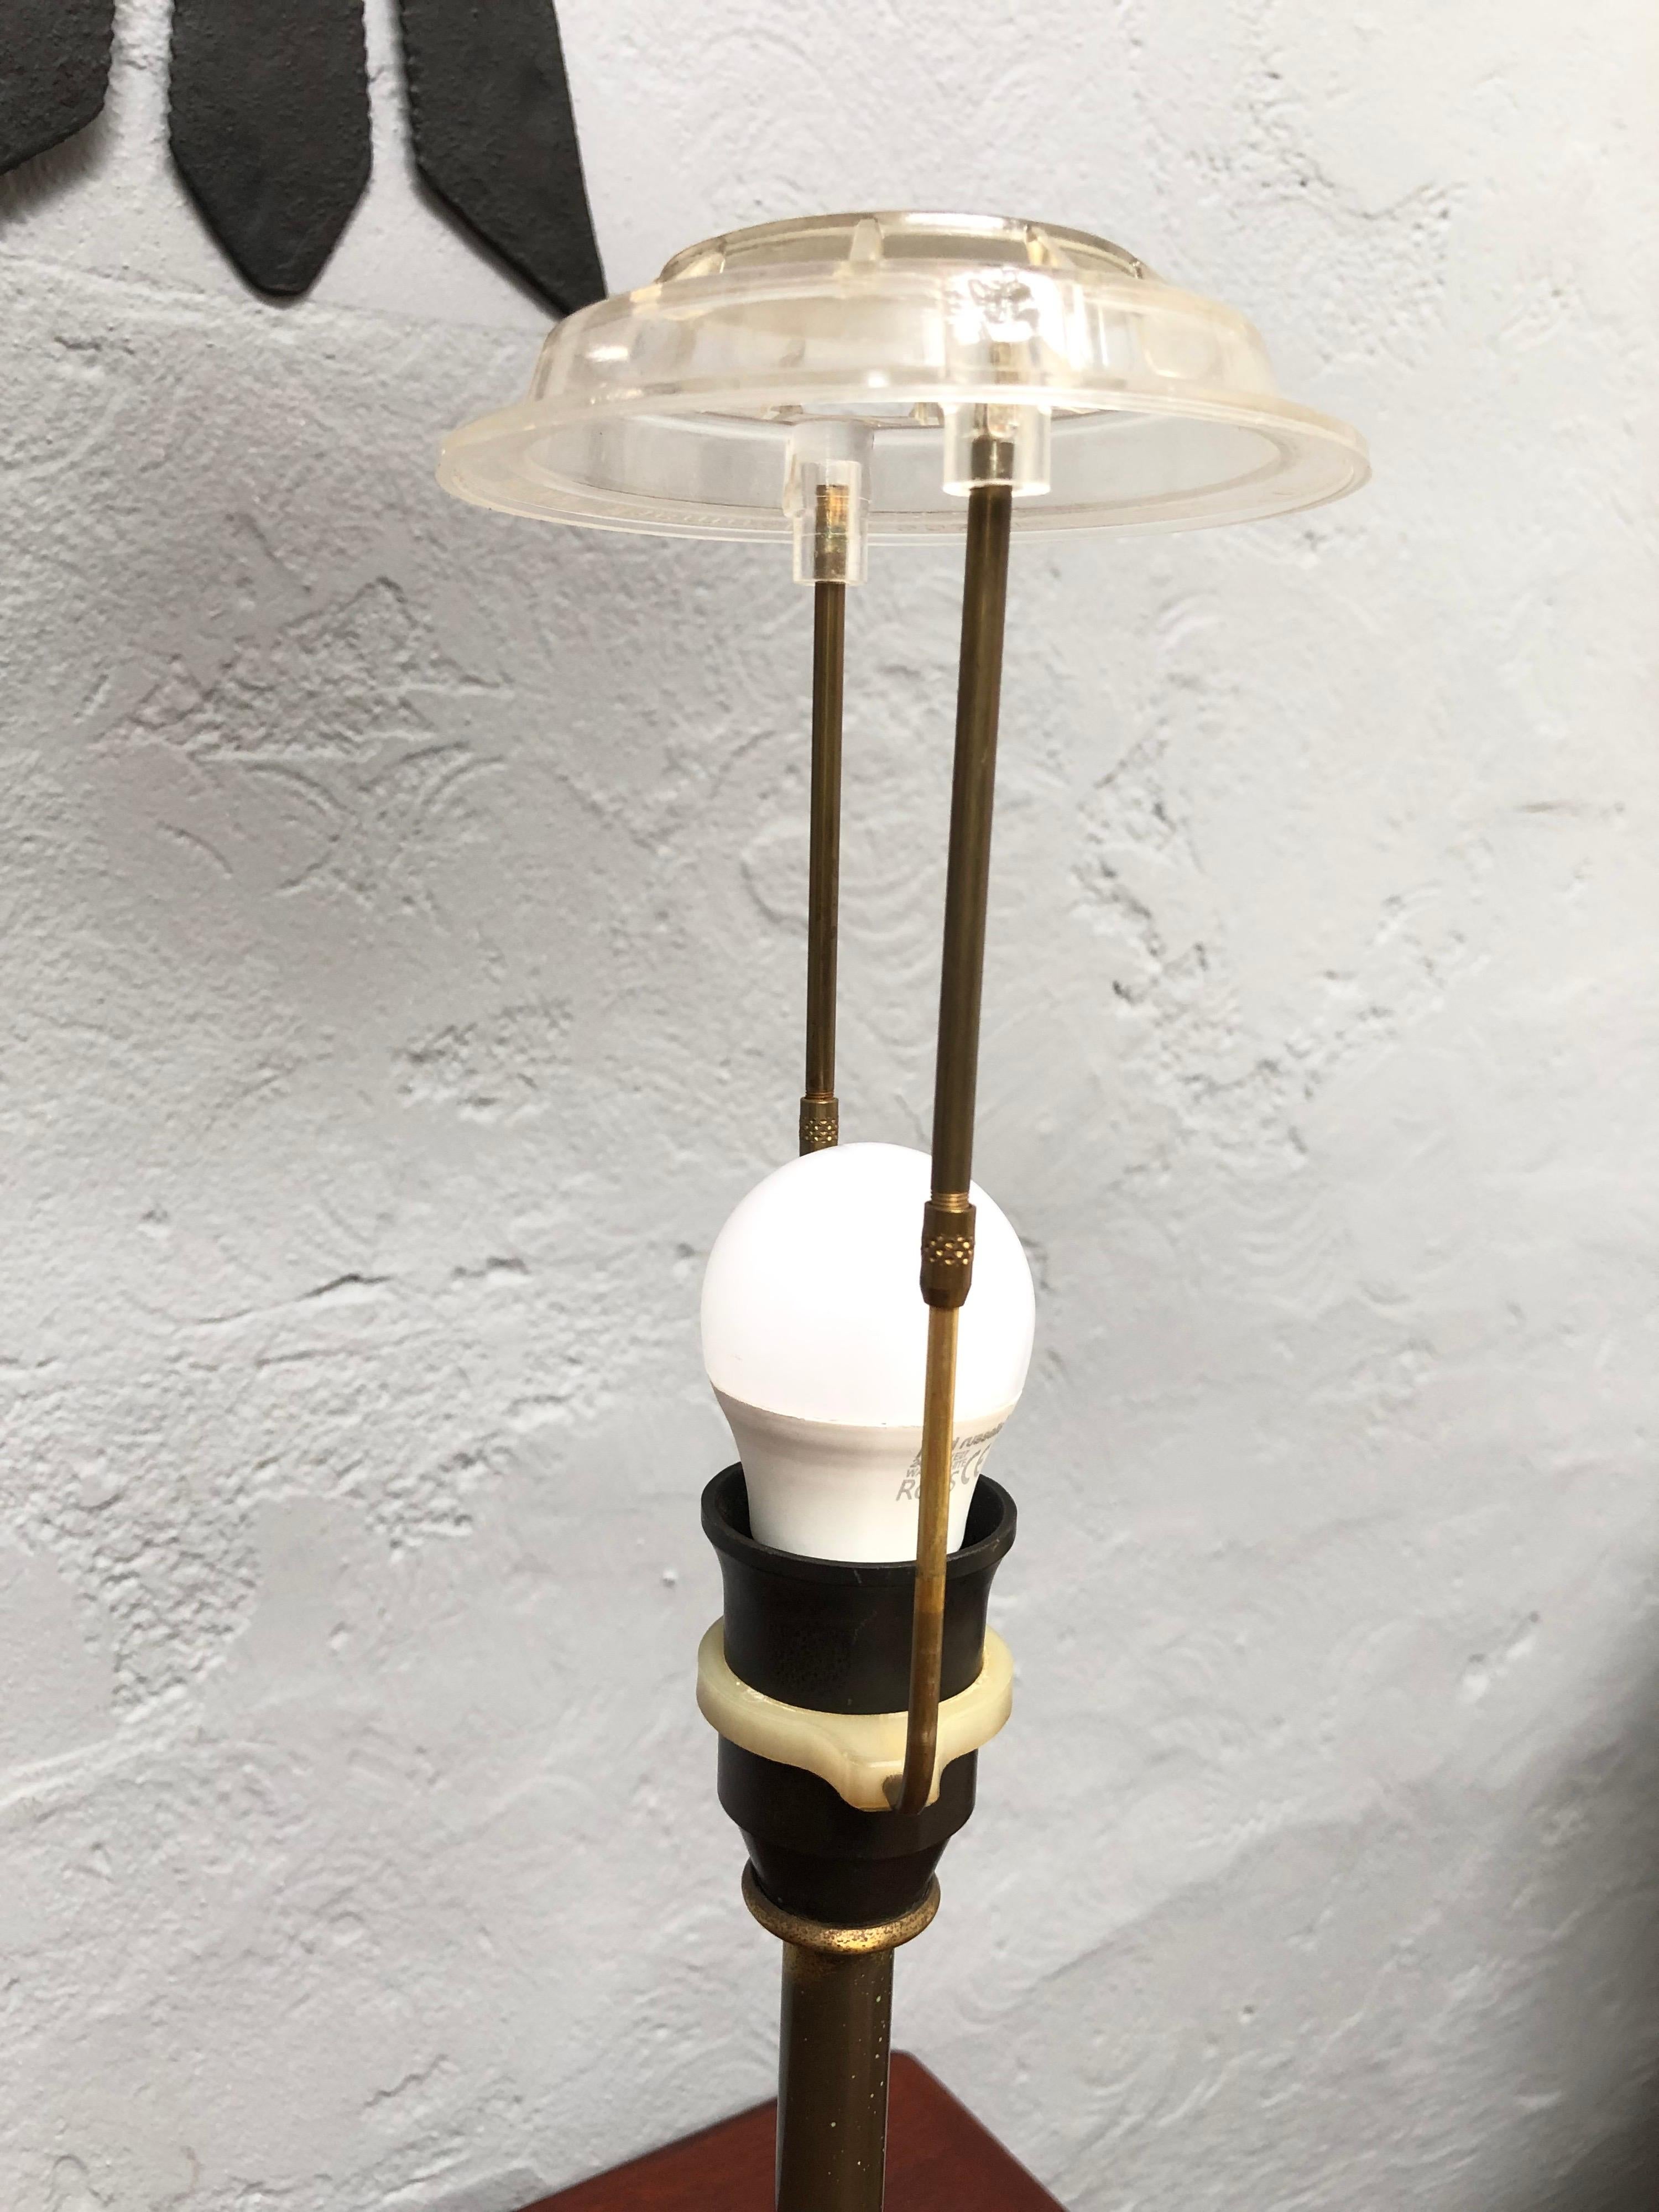 Vintage Brass Table Lamp by Fog & Mørup Lamp Makers from the 1940s In Good Condition For Sale In Søborg, DK